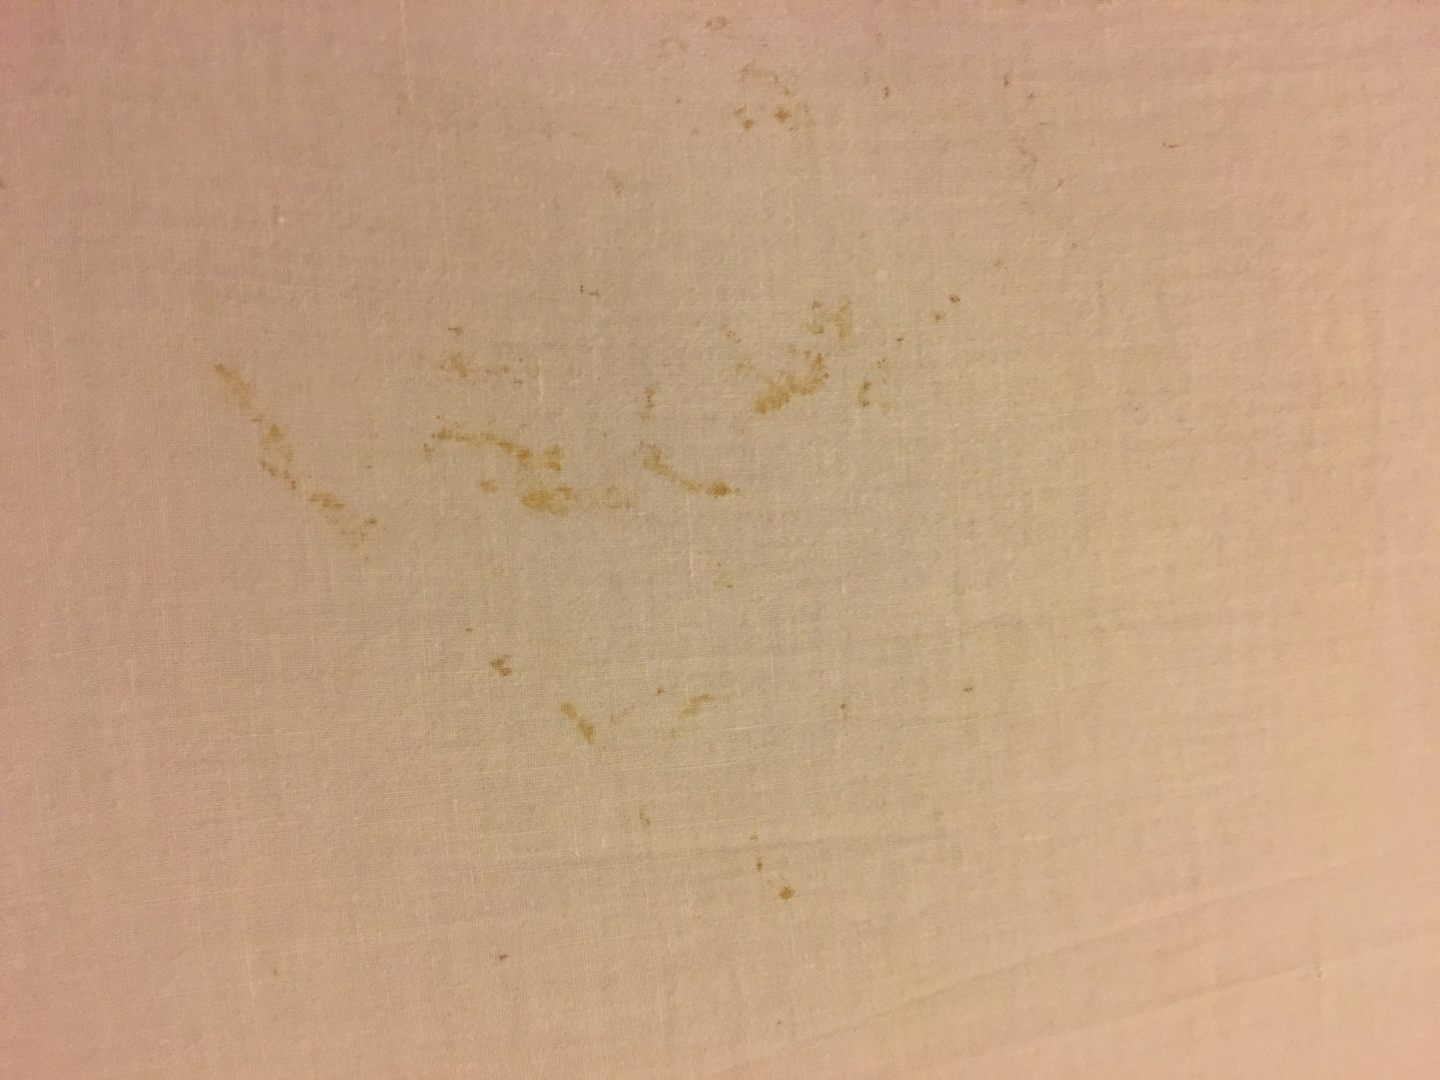 More stains on matress protector